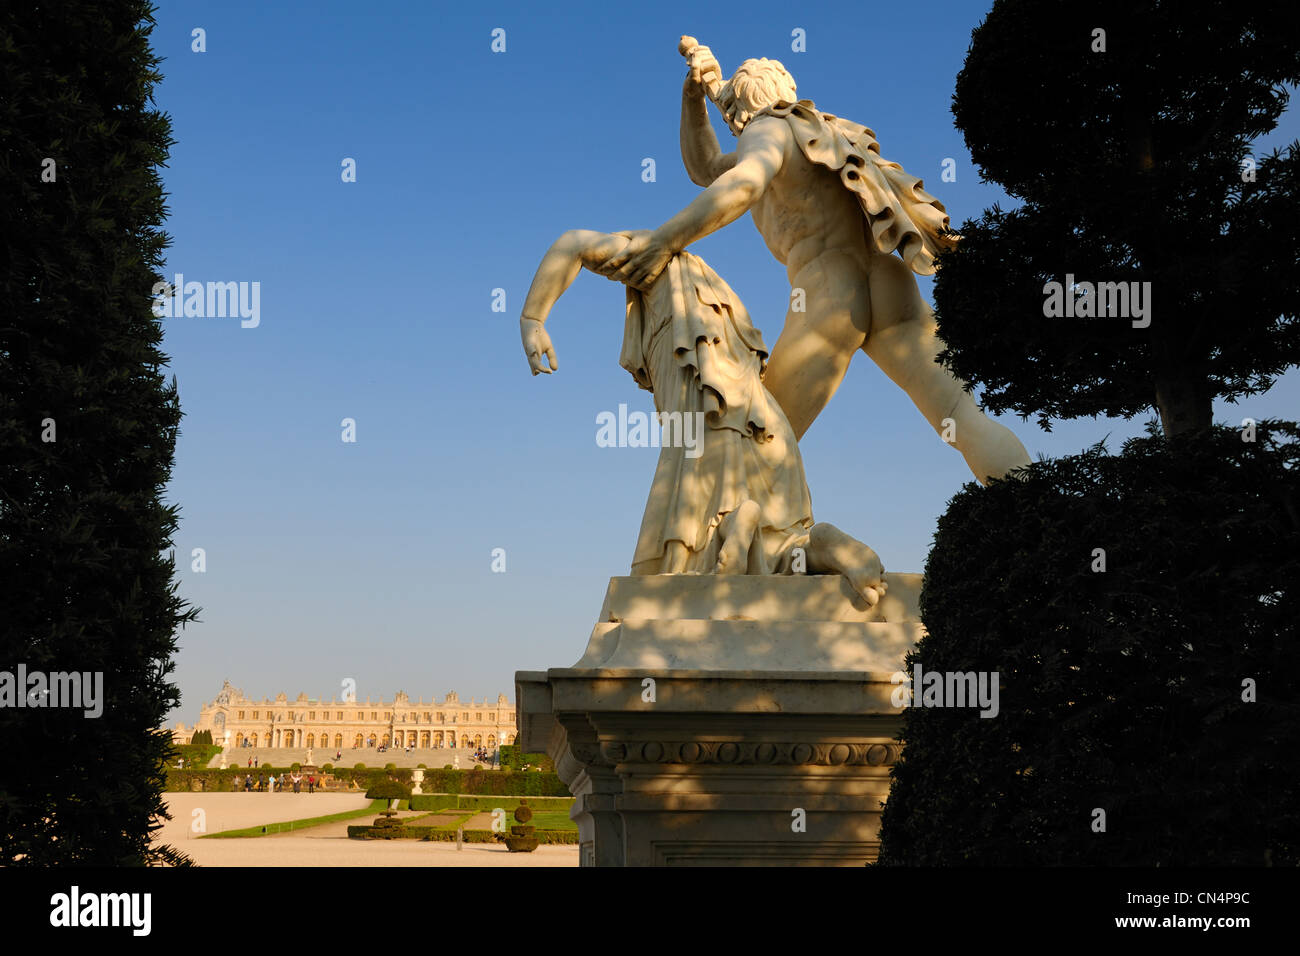 France, Yvelines, statue of the park of the Chateau de Versailles, listed as World Heritage by UNESCO Stock Photo